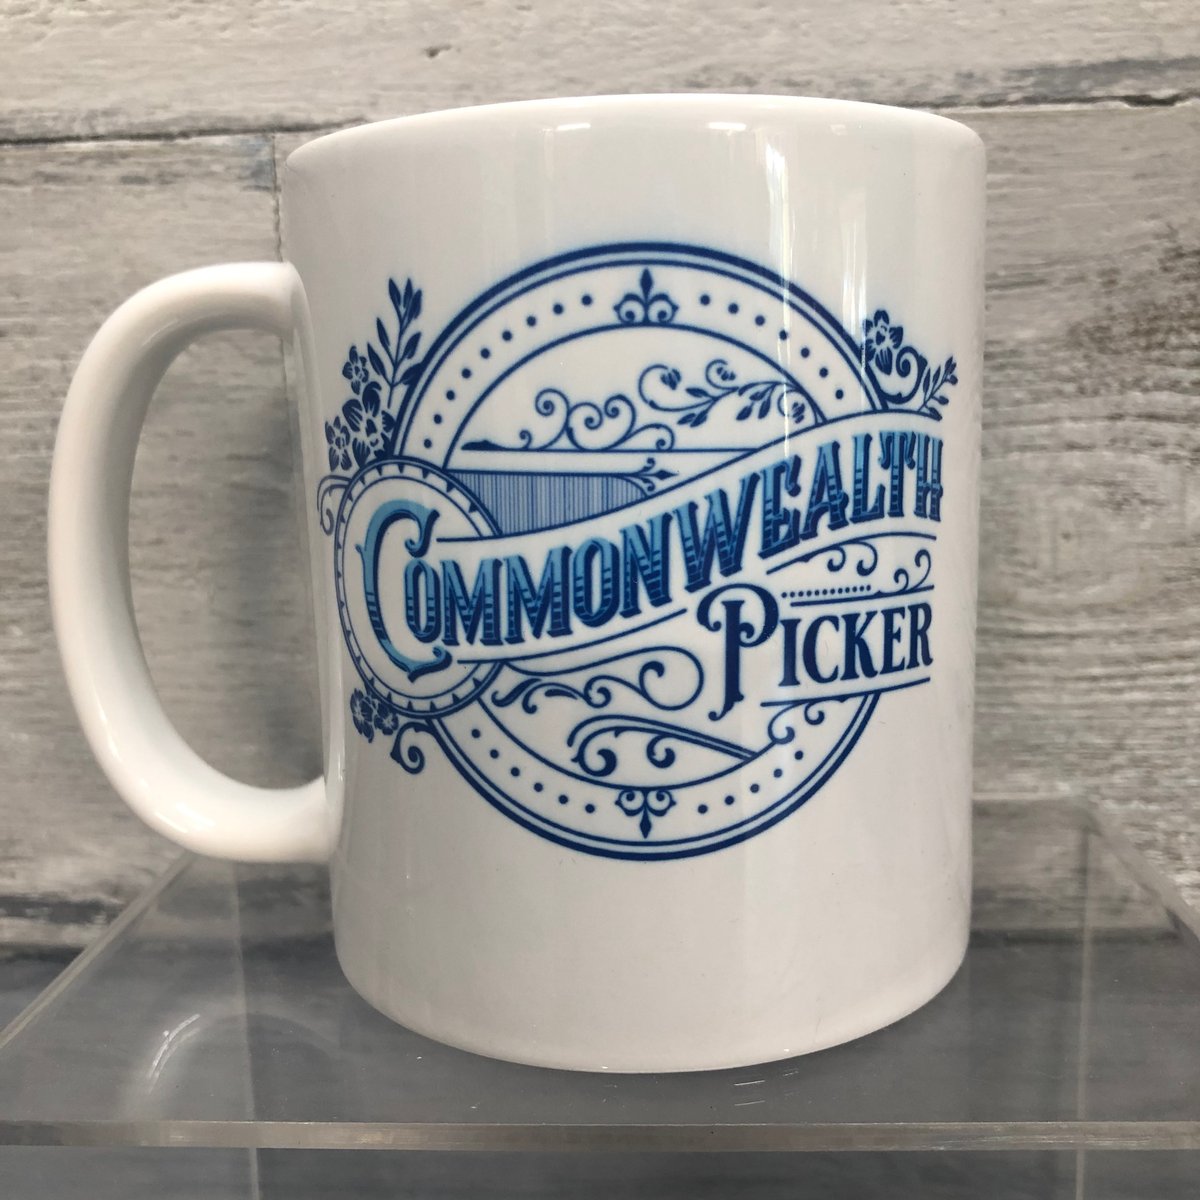 The Official Commonwealth Picker Mug